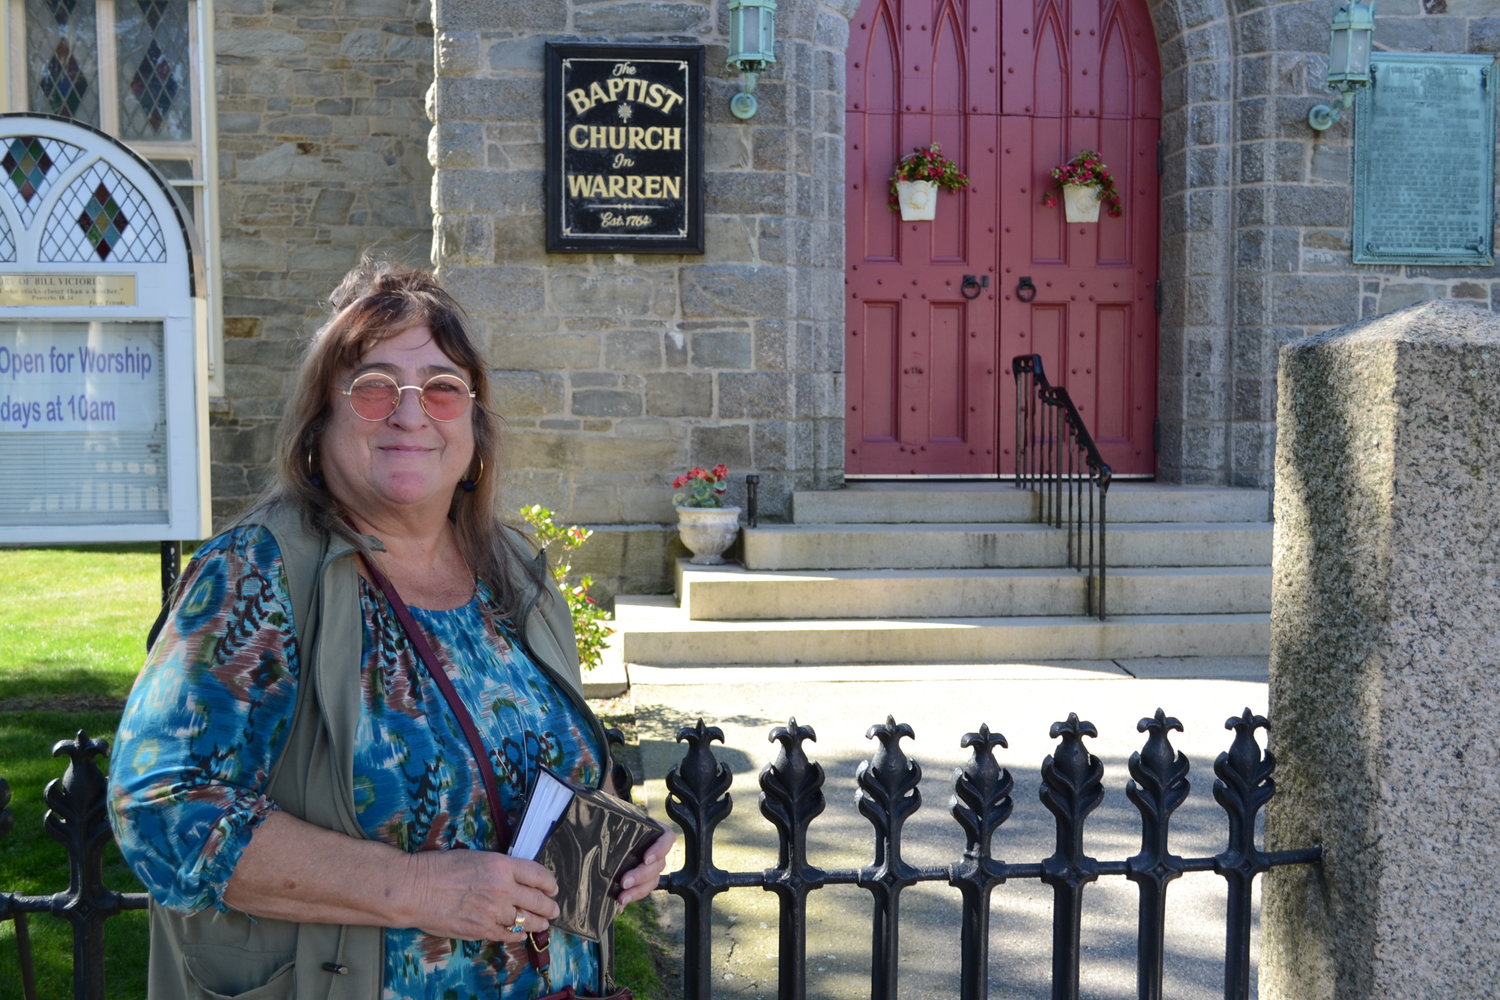 Joan Quinn has given haunted tours of Bristol for the past four years, and this year has expanded her reach to include a walk through downtown Warren, including such historic landmarks as the First Baptist Church, pictured here.